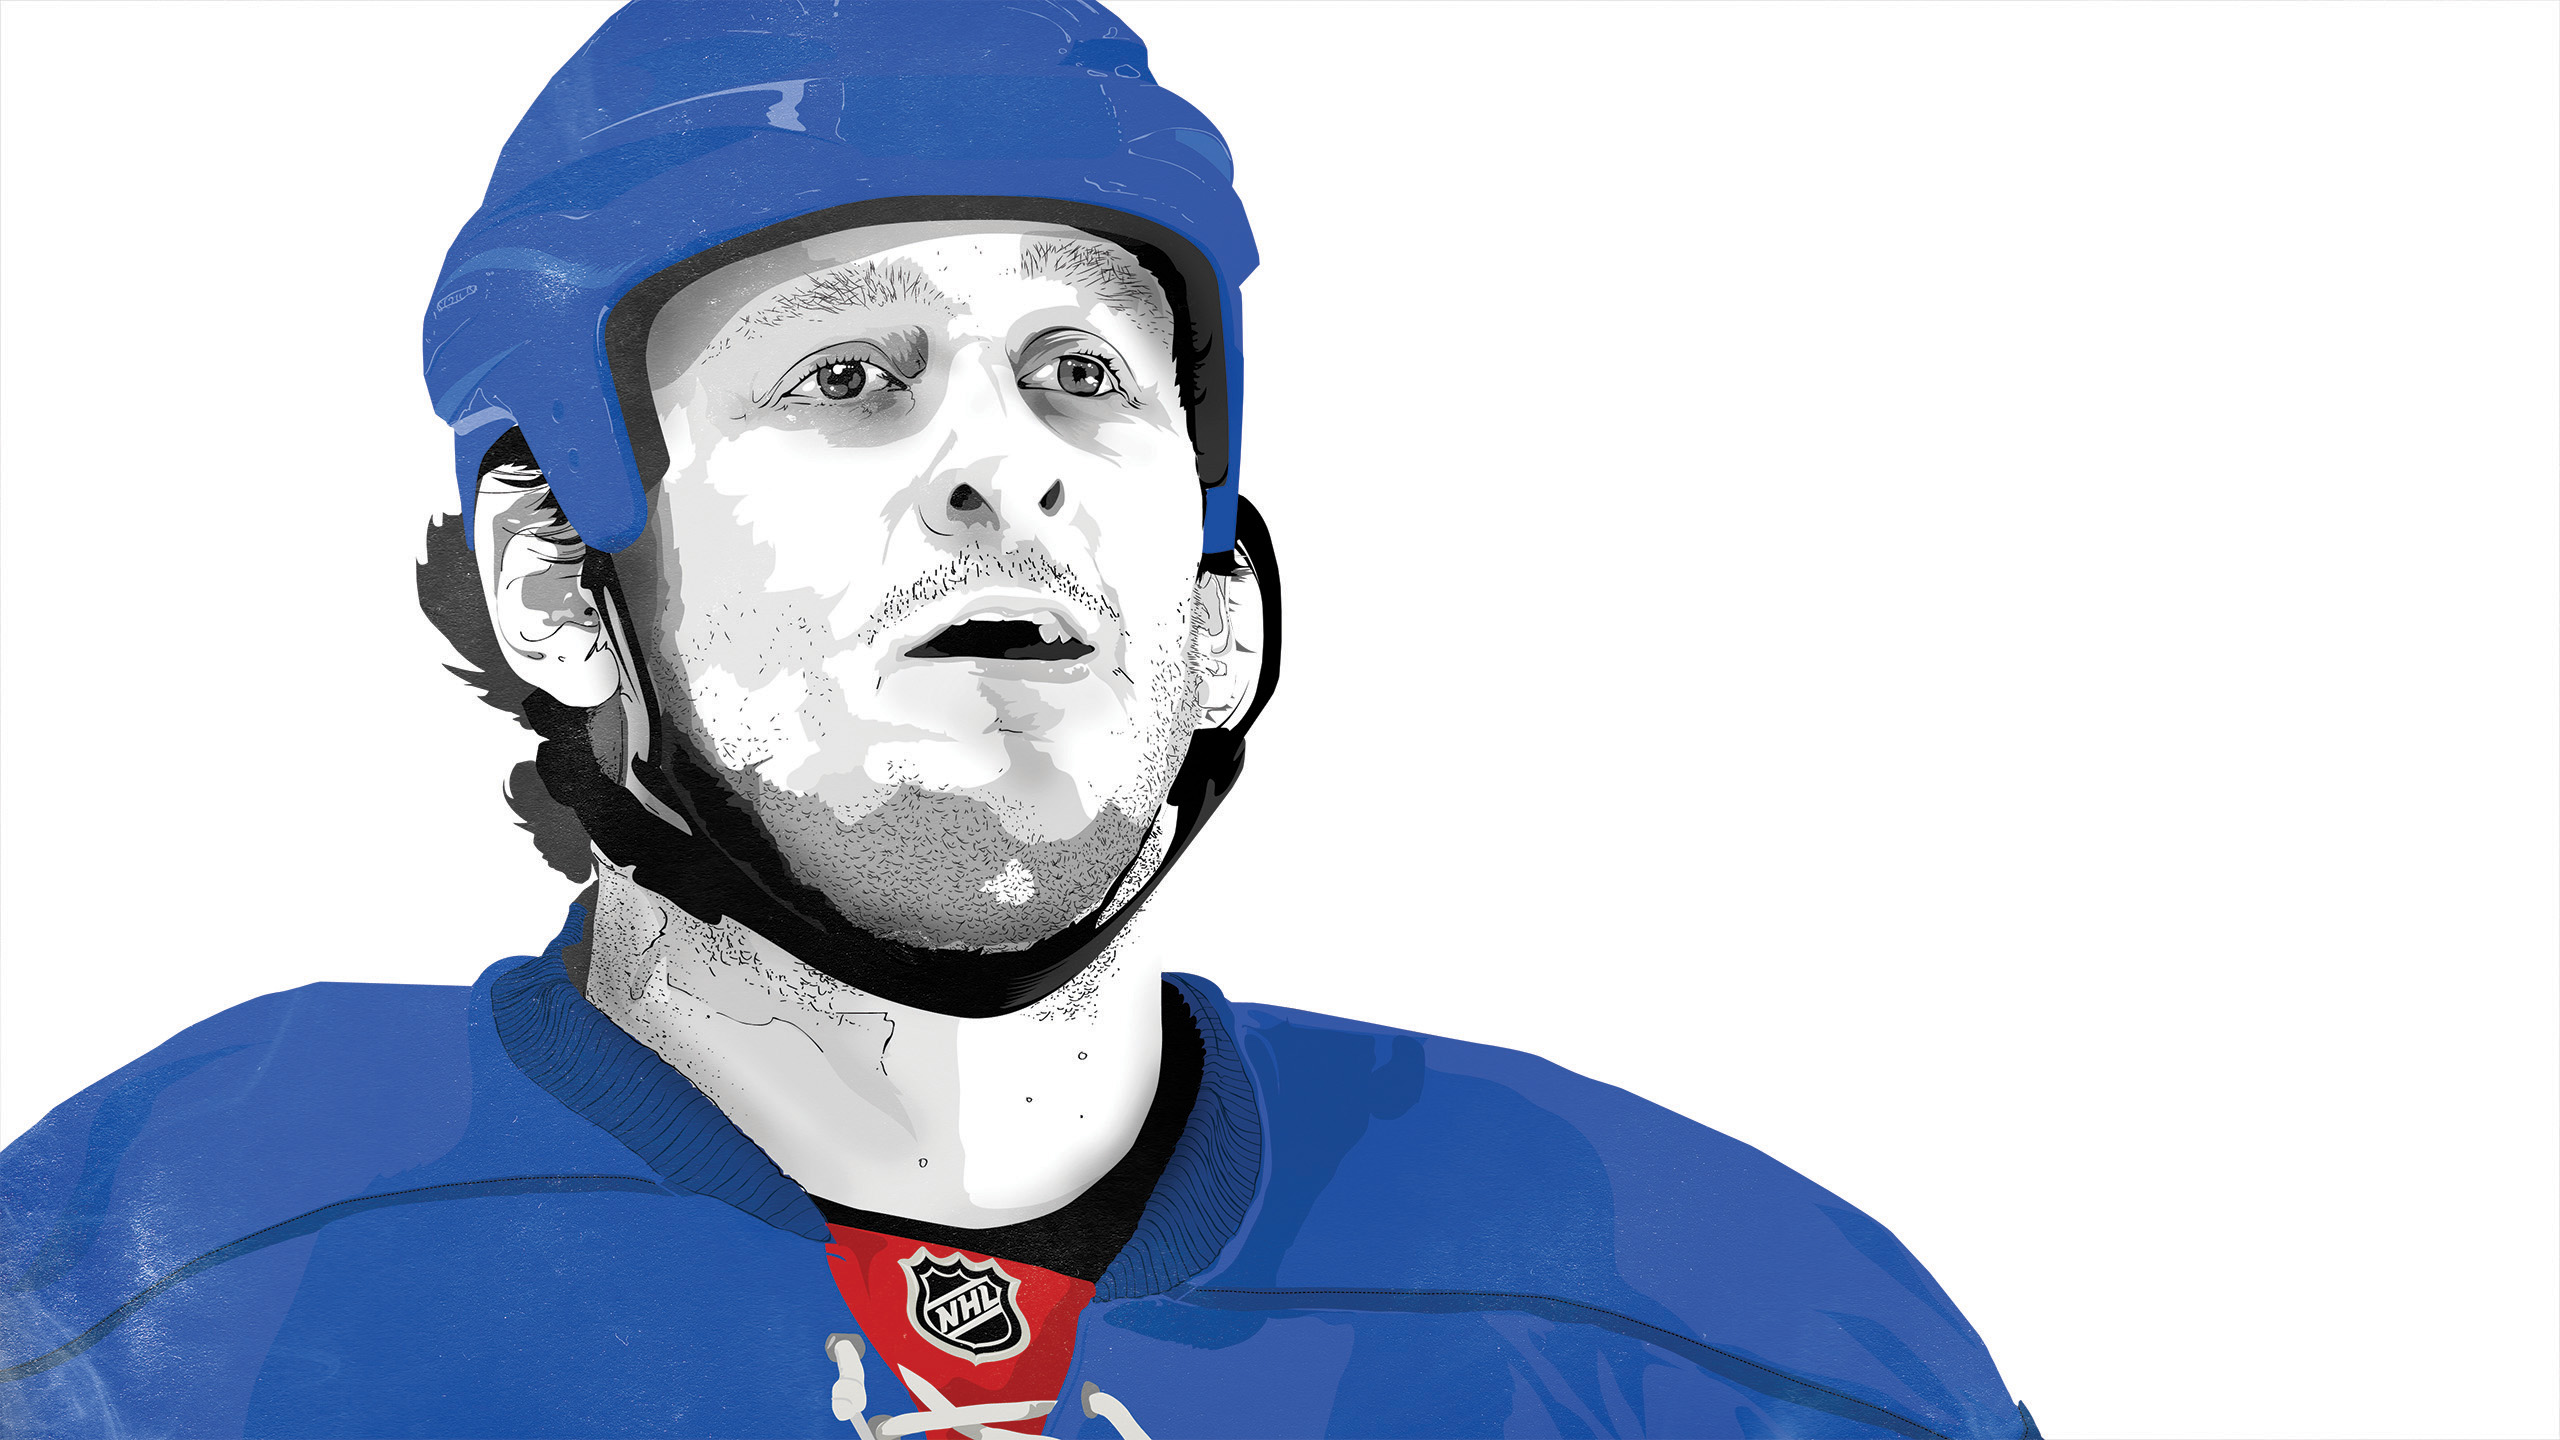 Report: Two charged in Derek Boogaard overdose death, one a son of a former  Islander - Lighthouse Hockey